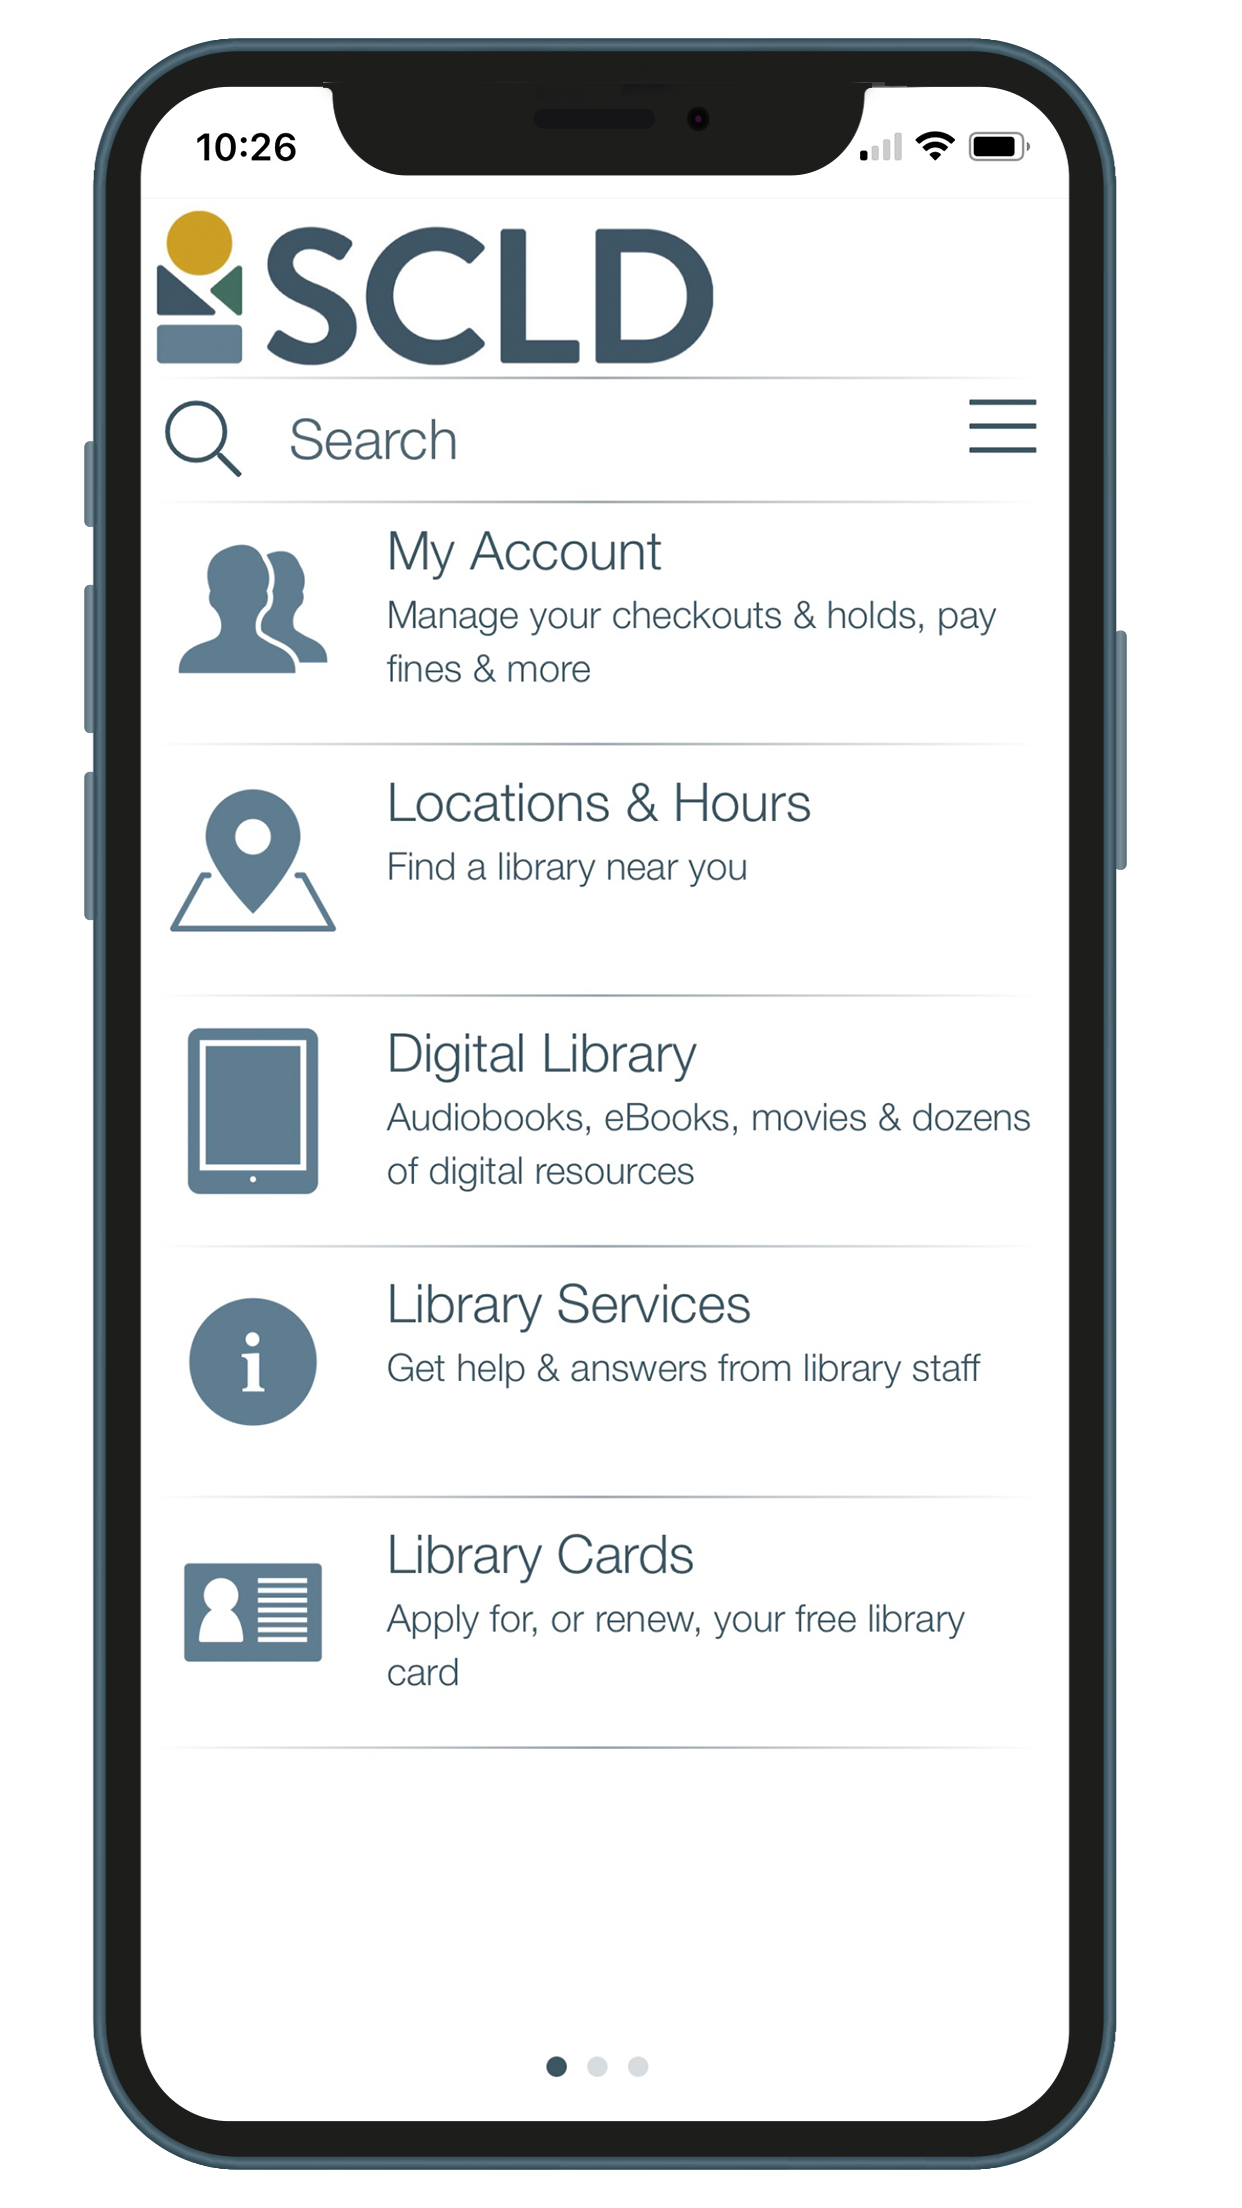 Mobile phone showing the Spokane County Library app